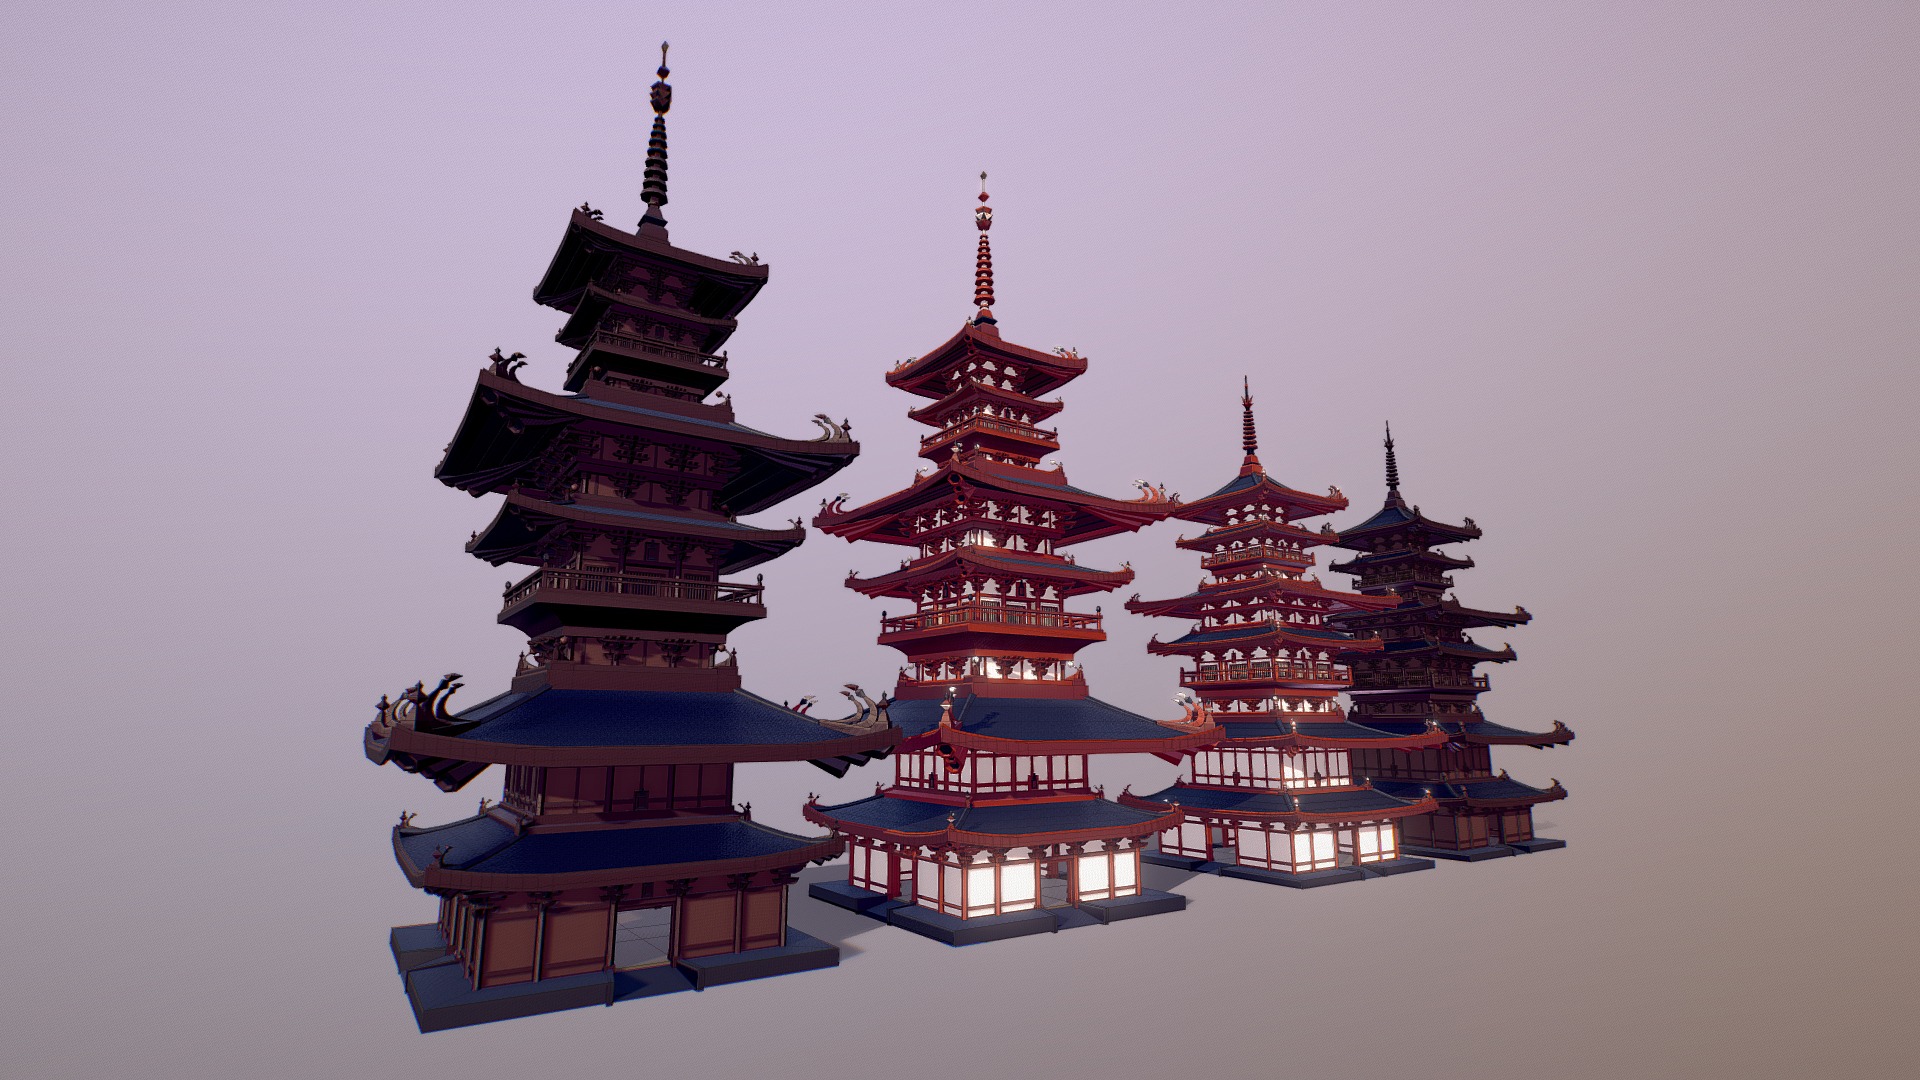 3D model Pagoda (Low Poly) - This is a 3D model of the Pagoda (Low Poly). The 3D model is about a couple of tall buildings with pointy roofs with Dragon and Tiger Pagodas in the background.